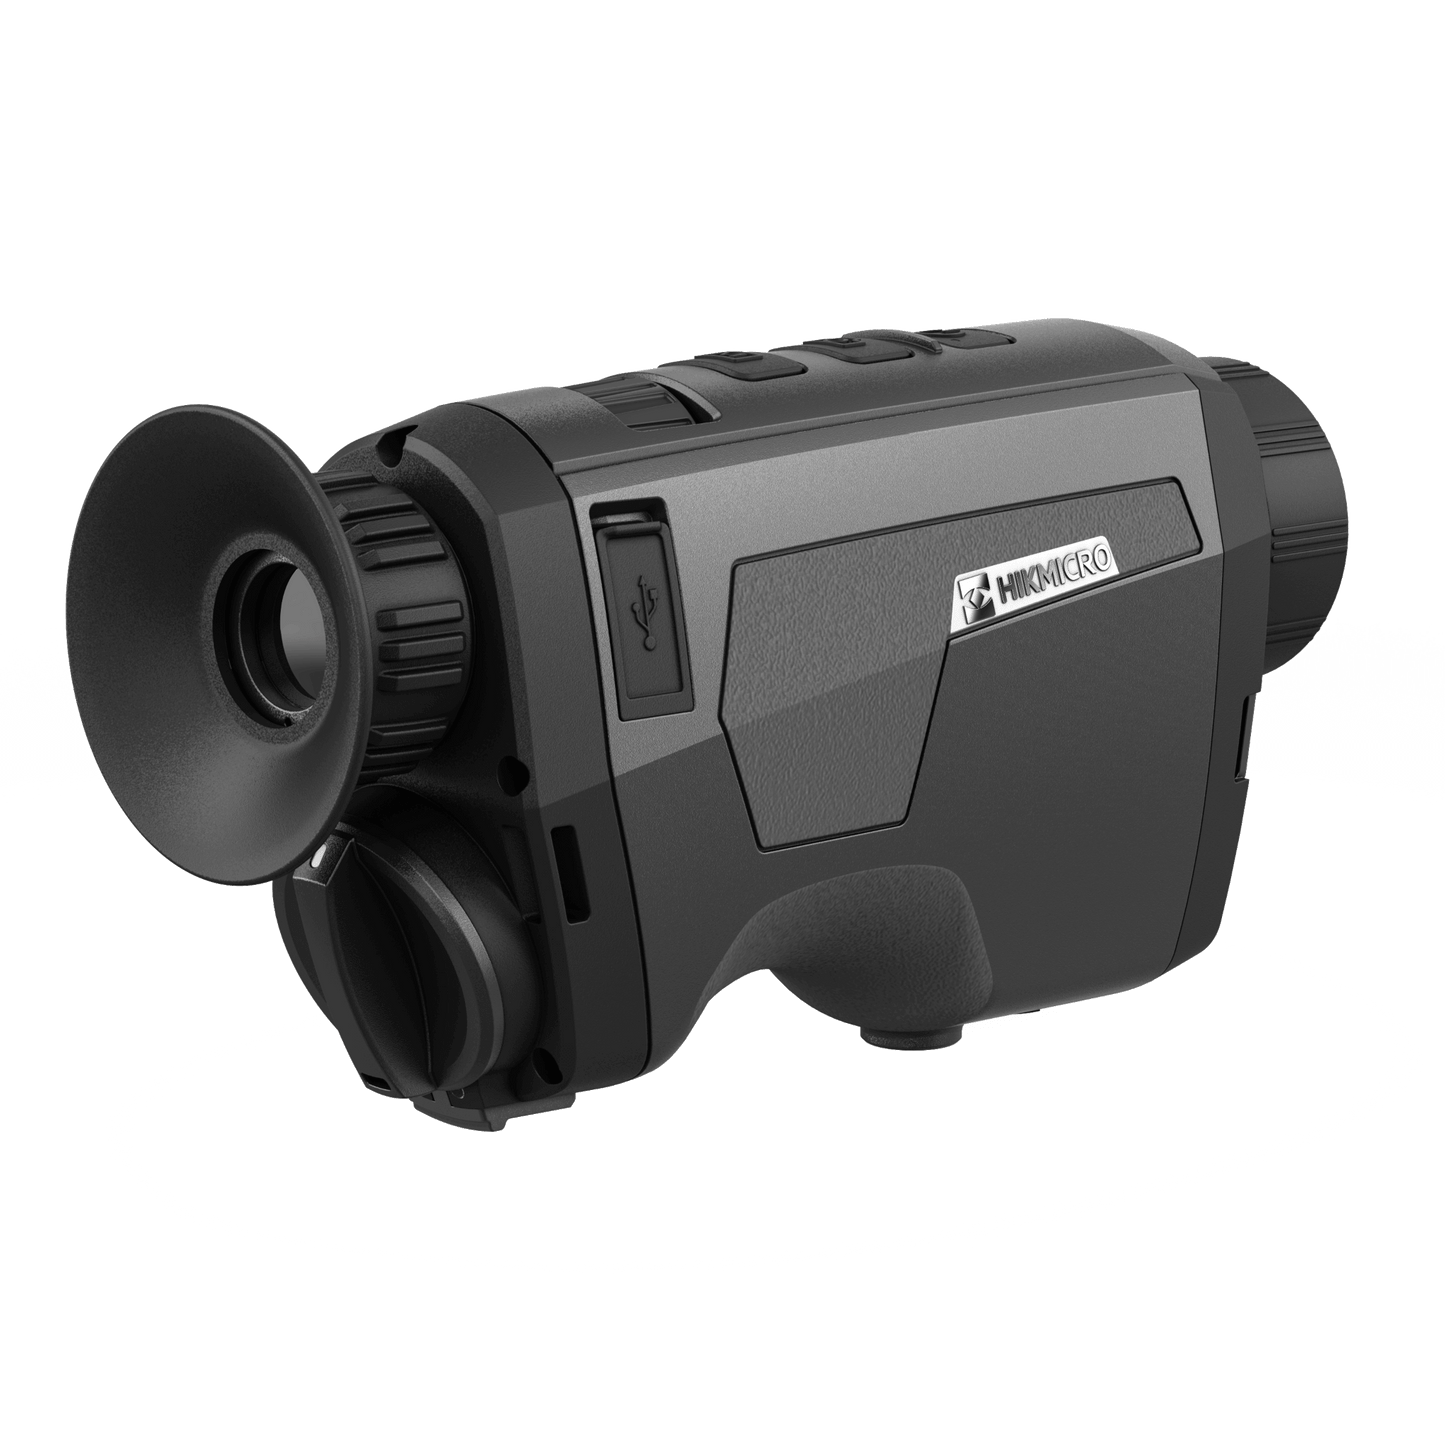 Cape Thermal imaging monocular for sale - HikMicro Gryphon GH35L Handheld thermal monocular rear right view with eye piece